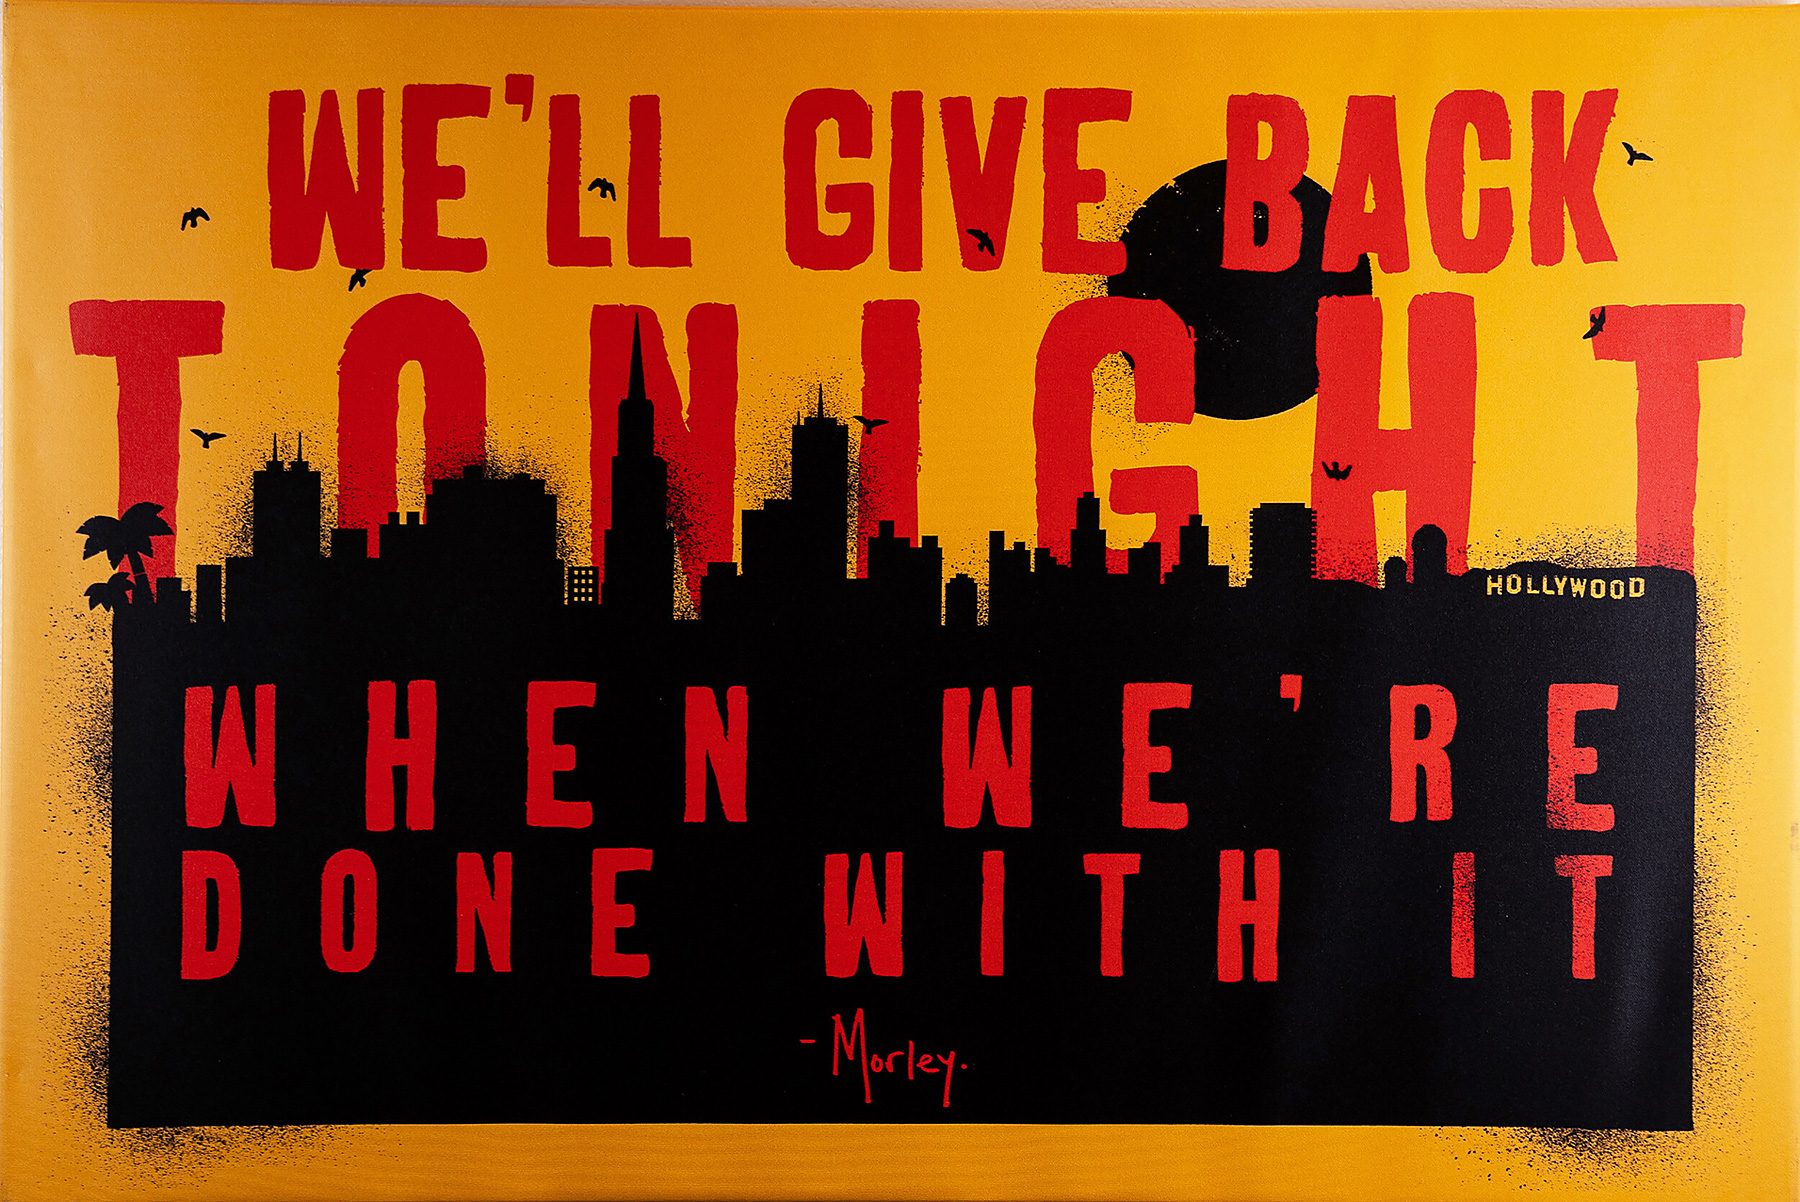 'Give Back Tonight' by street artist Morley